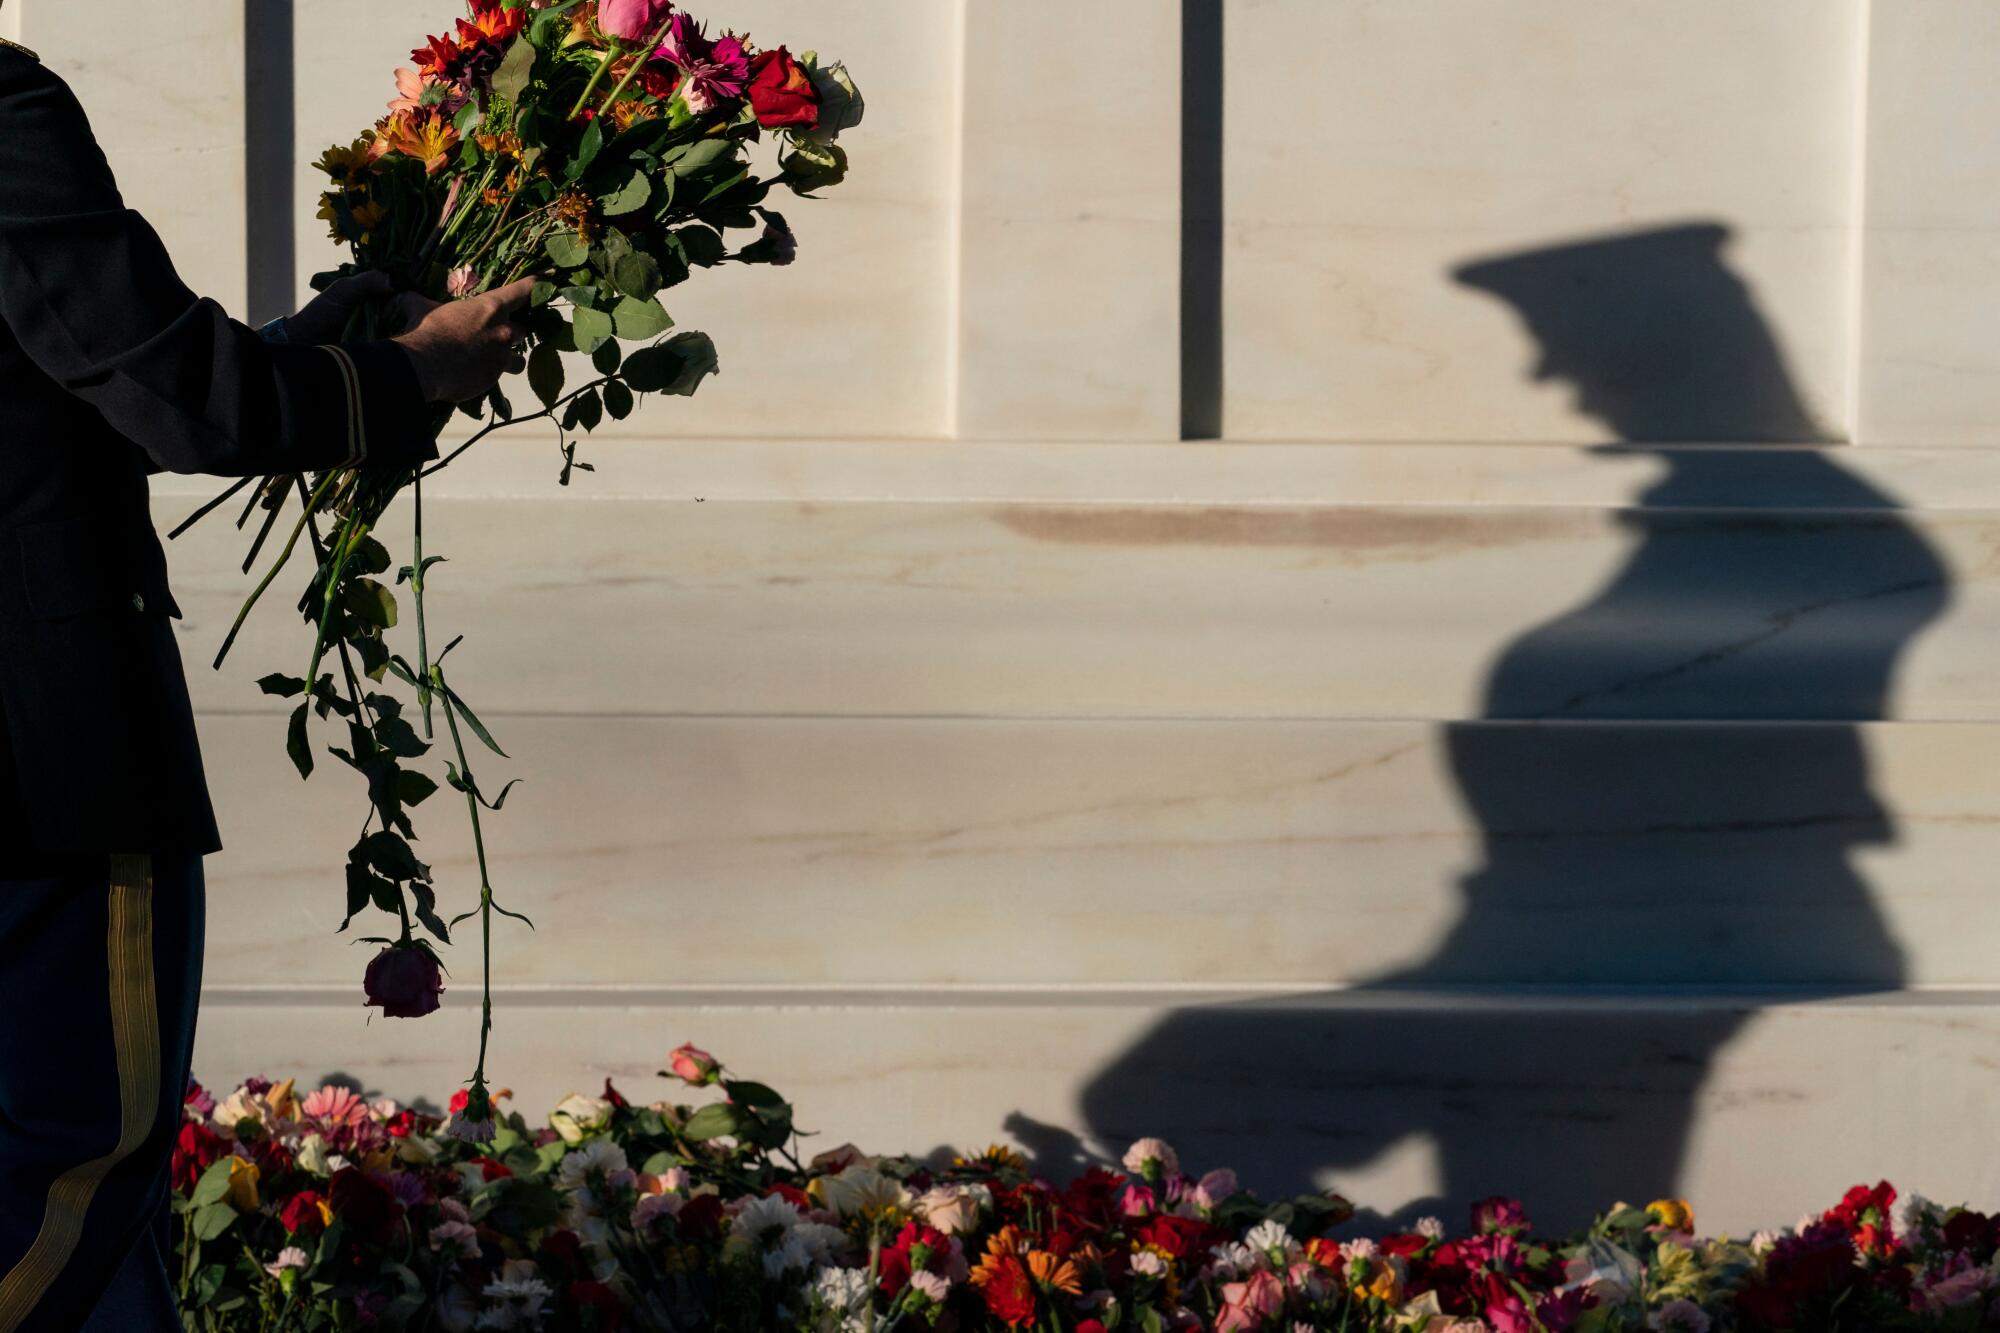 A soldier with the 3rd U.S. Infantry Regiment, known as The Old Guard, moves flowers